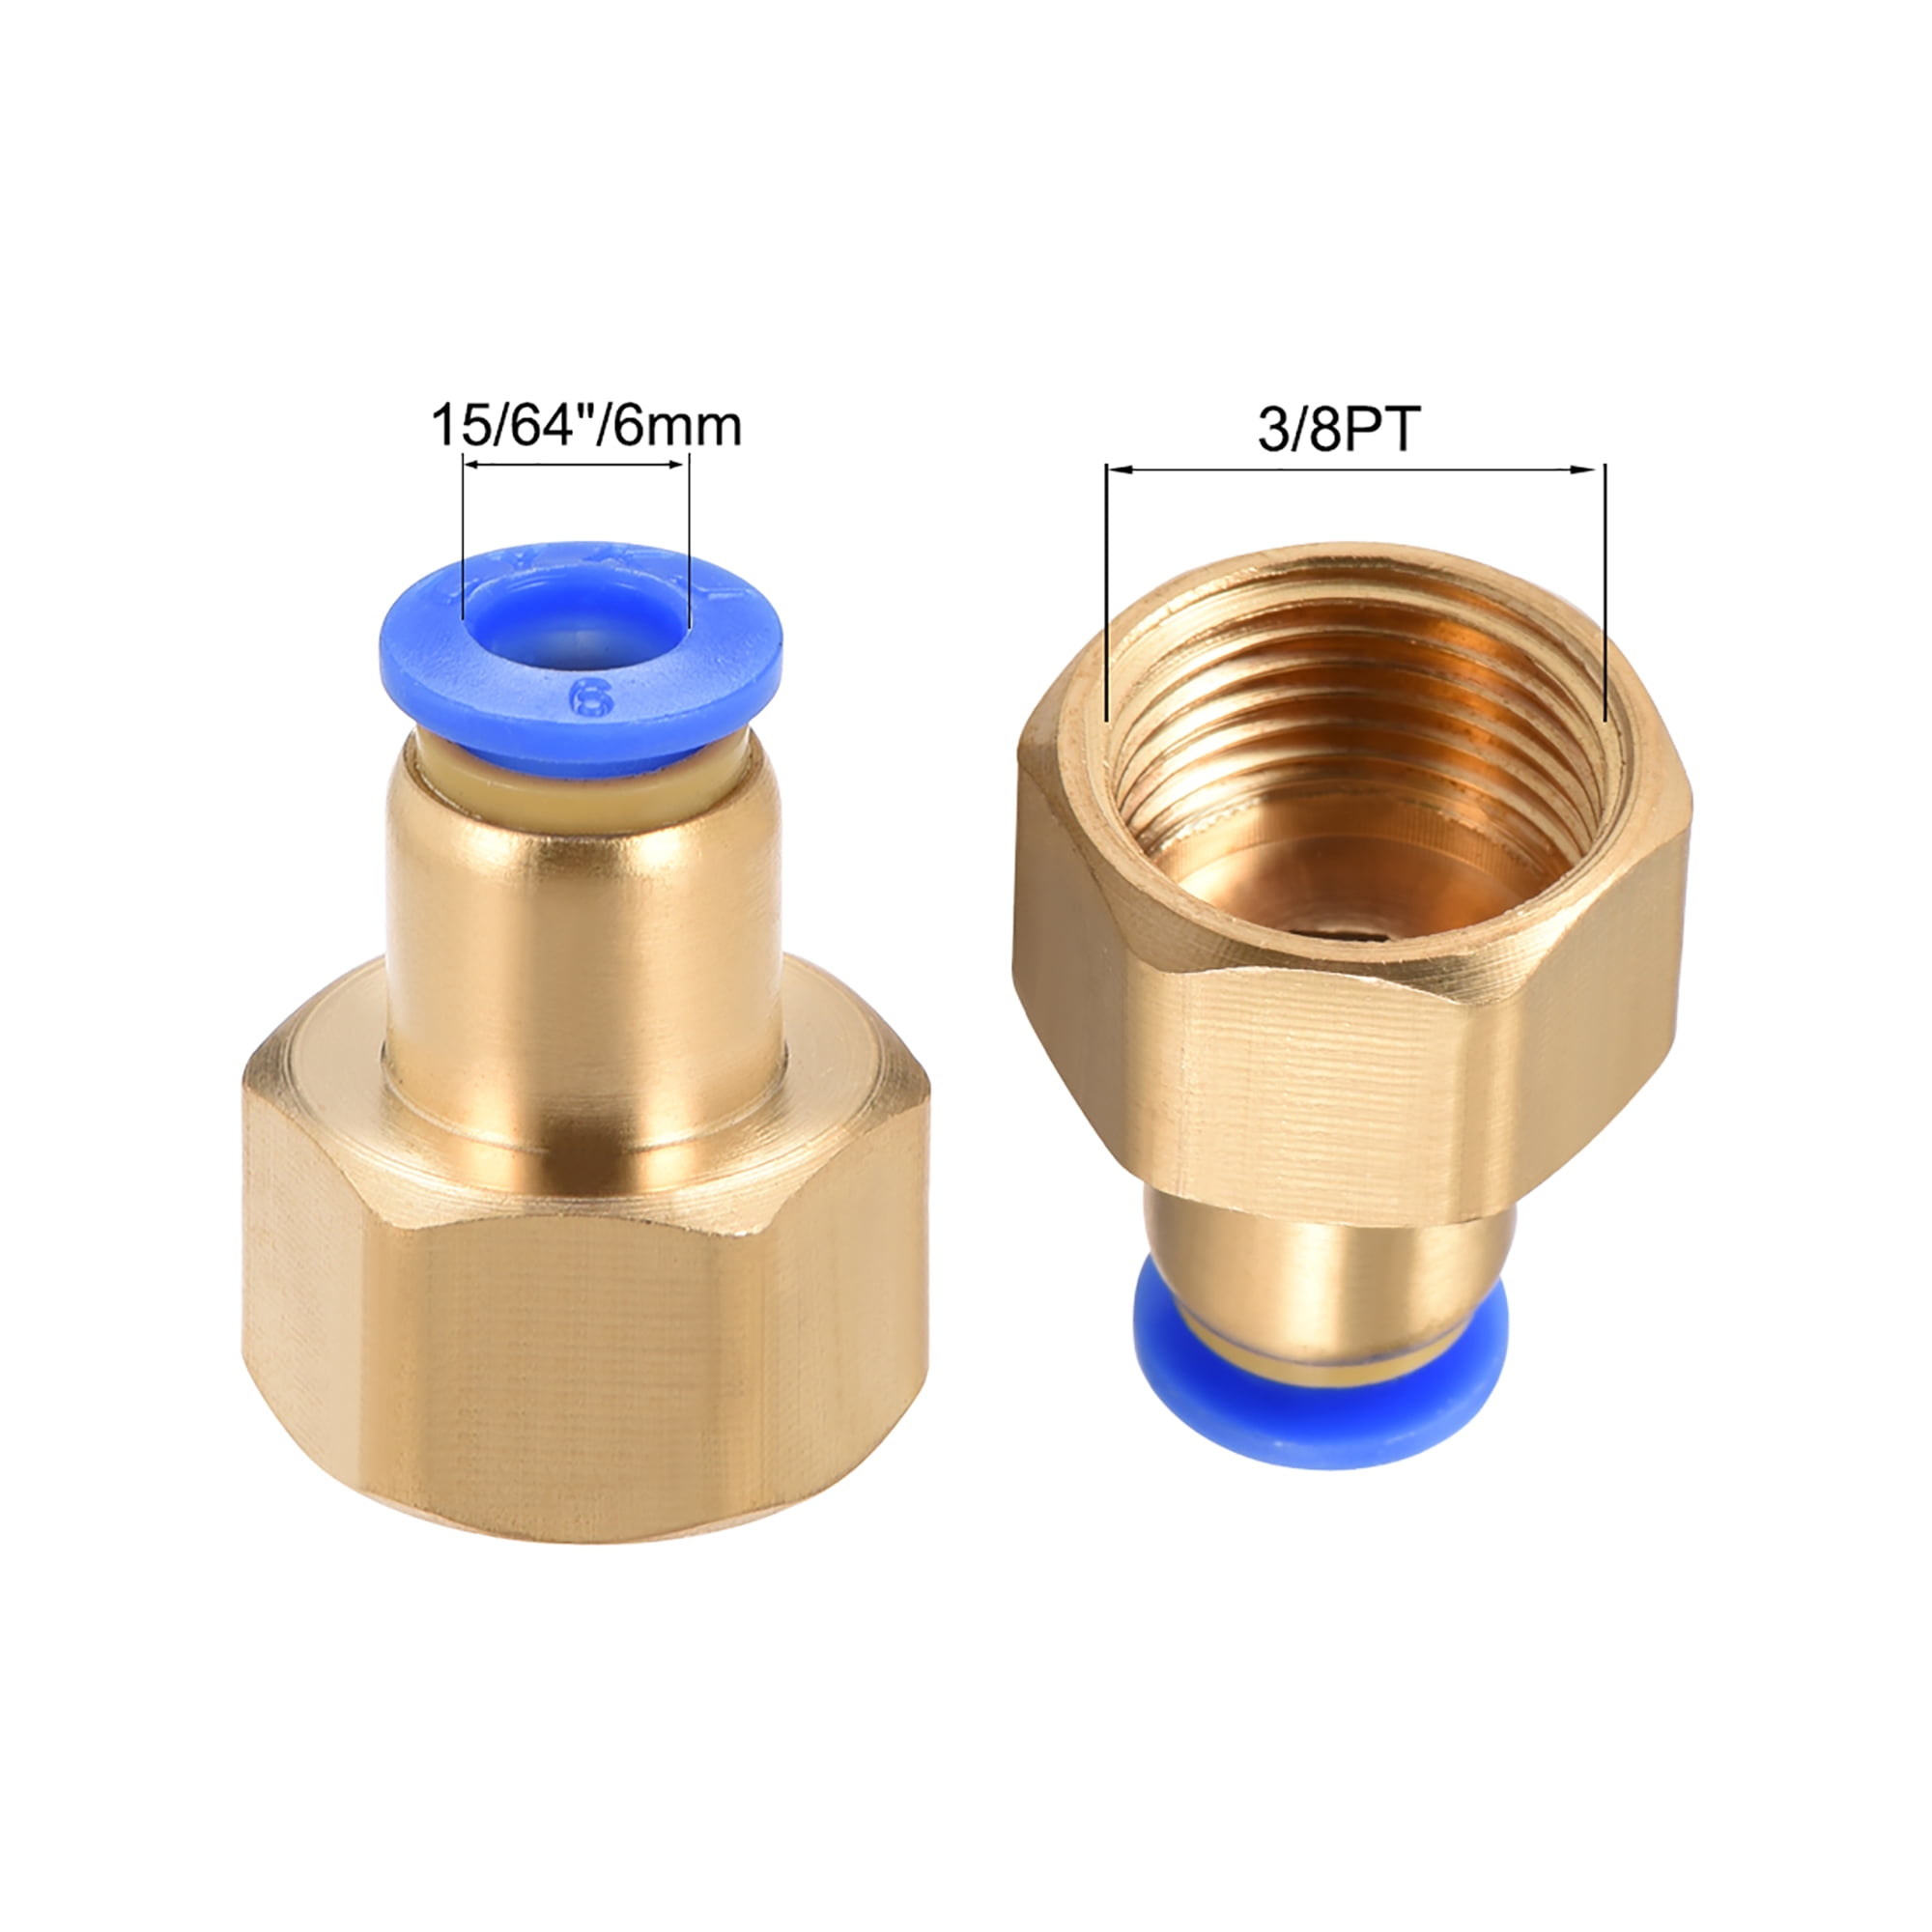 Push to Connect Tube Mount Adapter 6mm OD x G3 8Tube Female Straight Pneumatic Connector Connect 4pcs Tube Connection